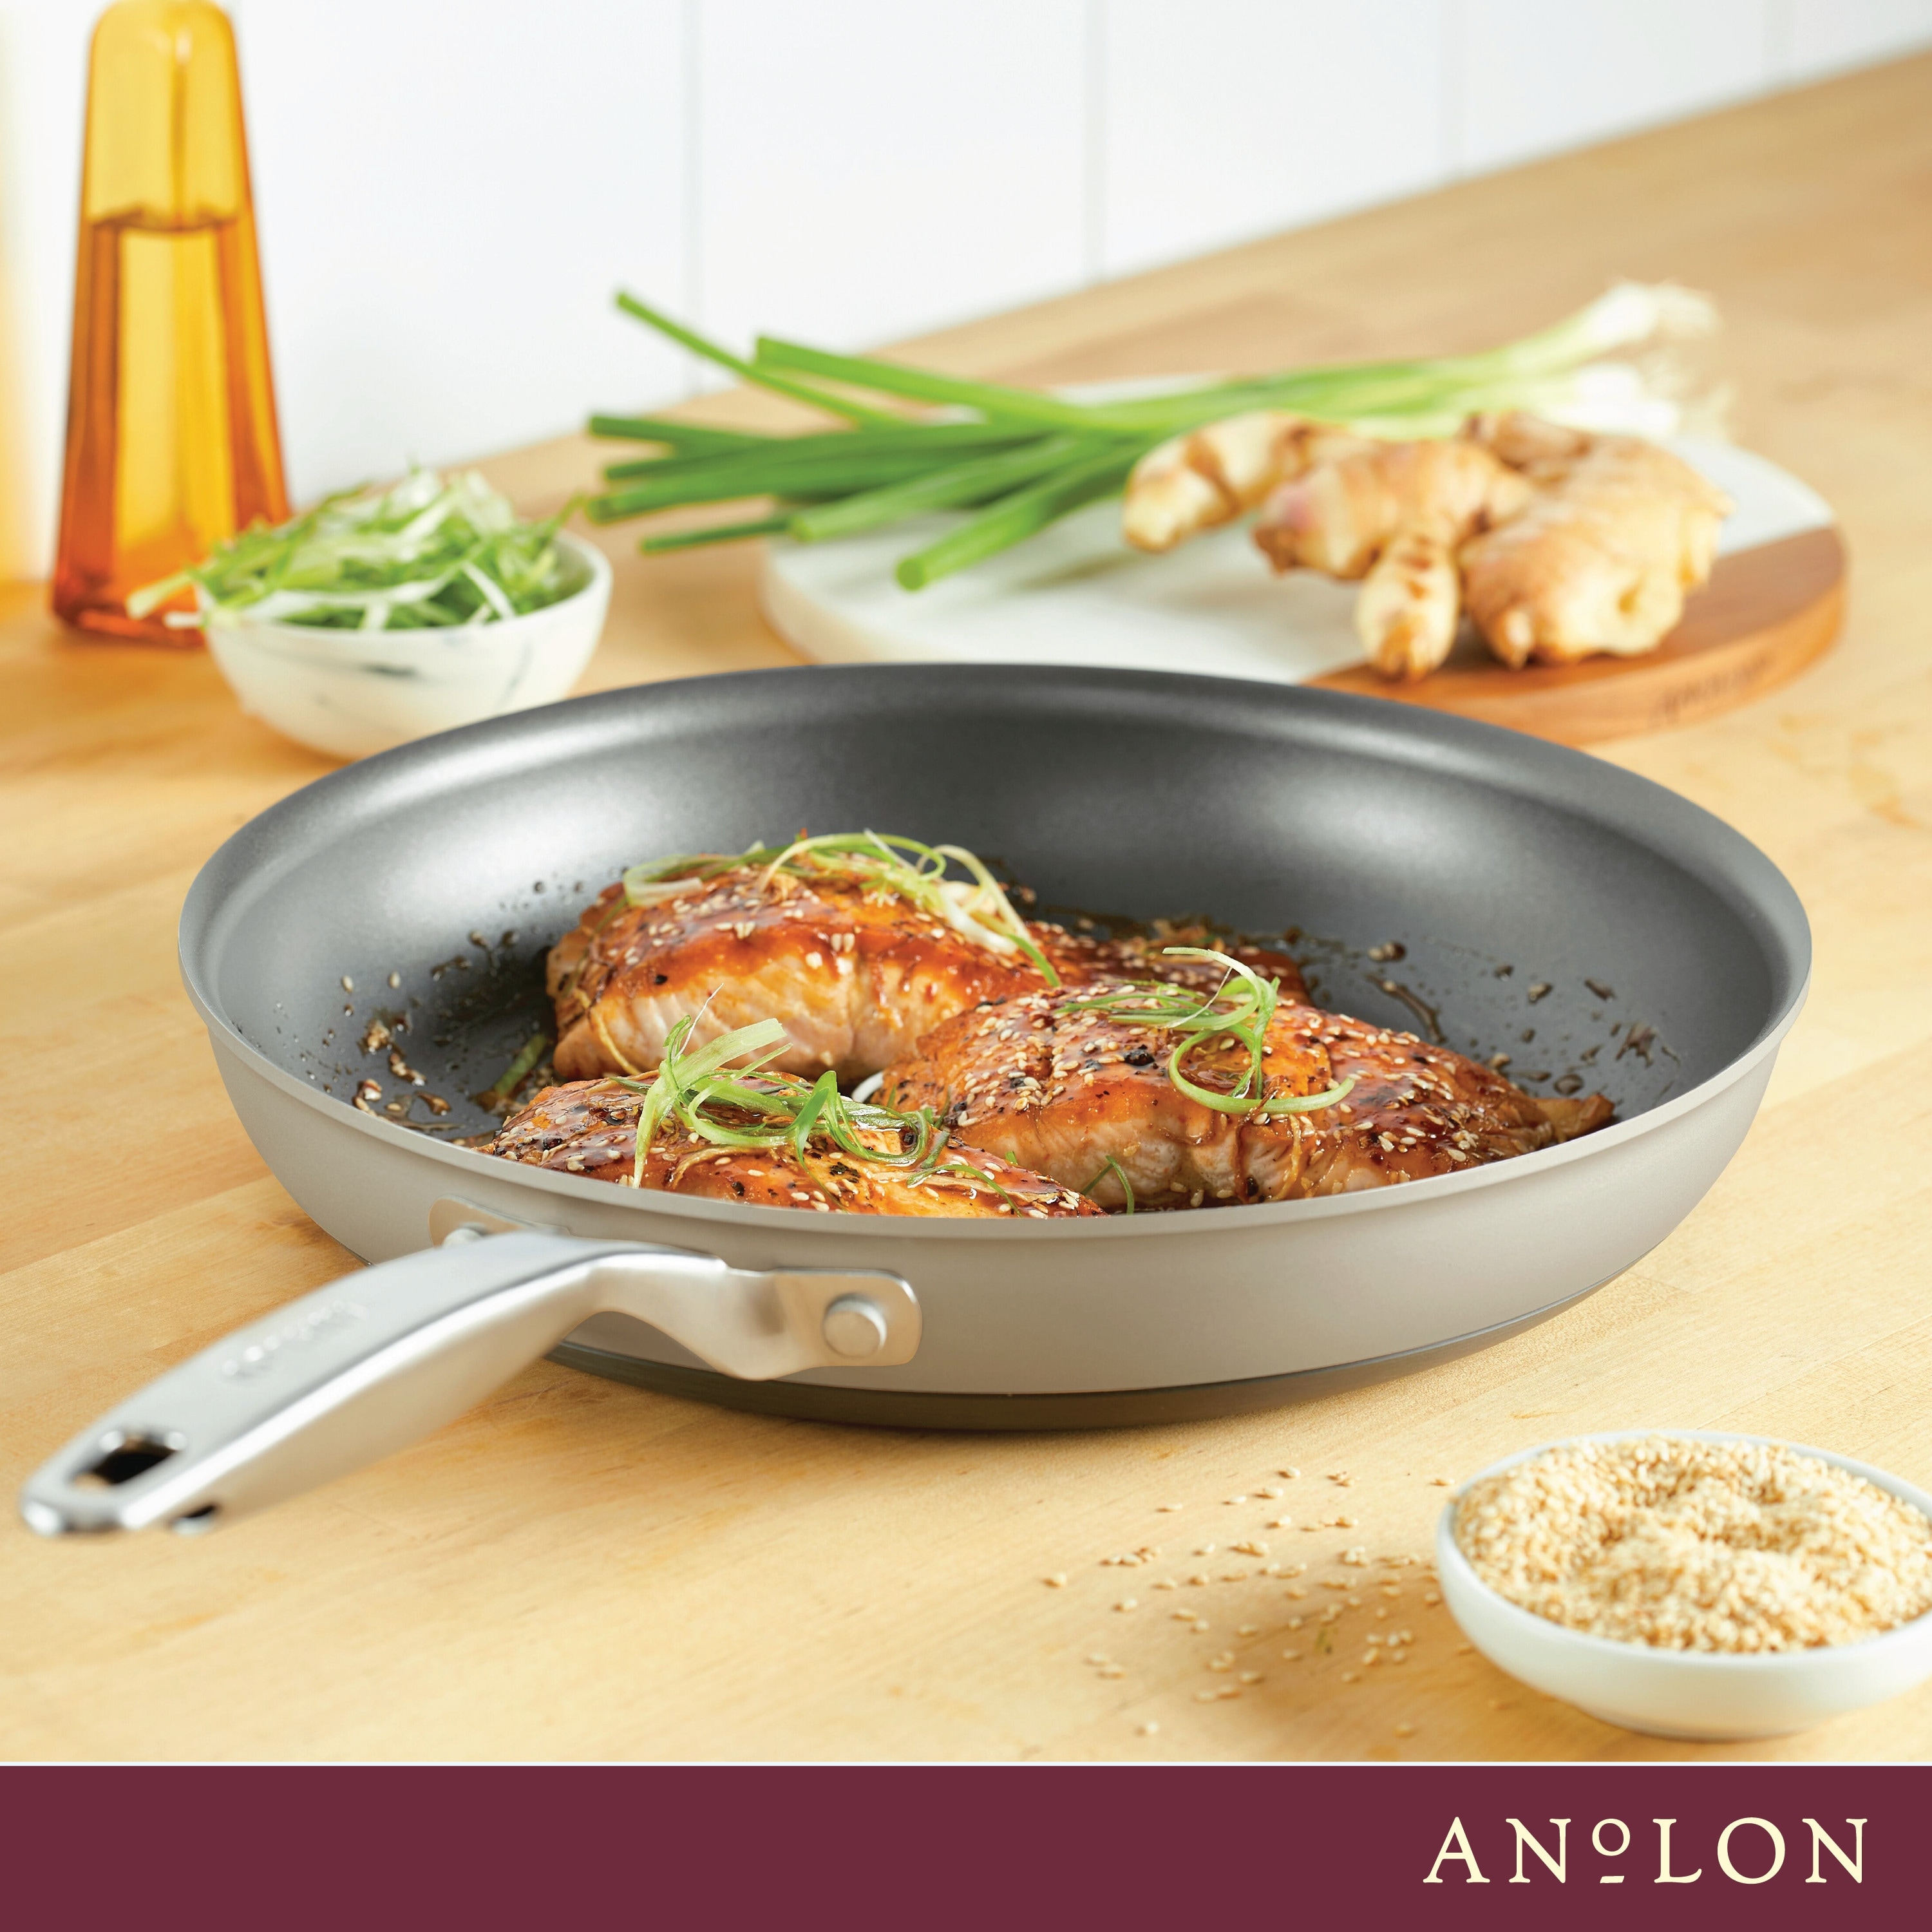 https://ak1.ostkcdn.com/images/products/is/images/direct/c420b127589dbdd4793f335d30b8cf390f47f228/Anolon-Achieve-Hard-Anodized-Nonstick-Frying-Pan.jpg